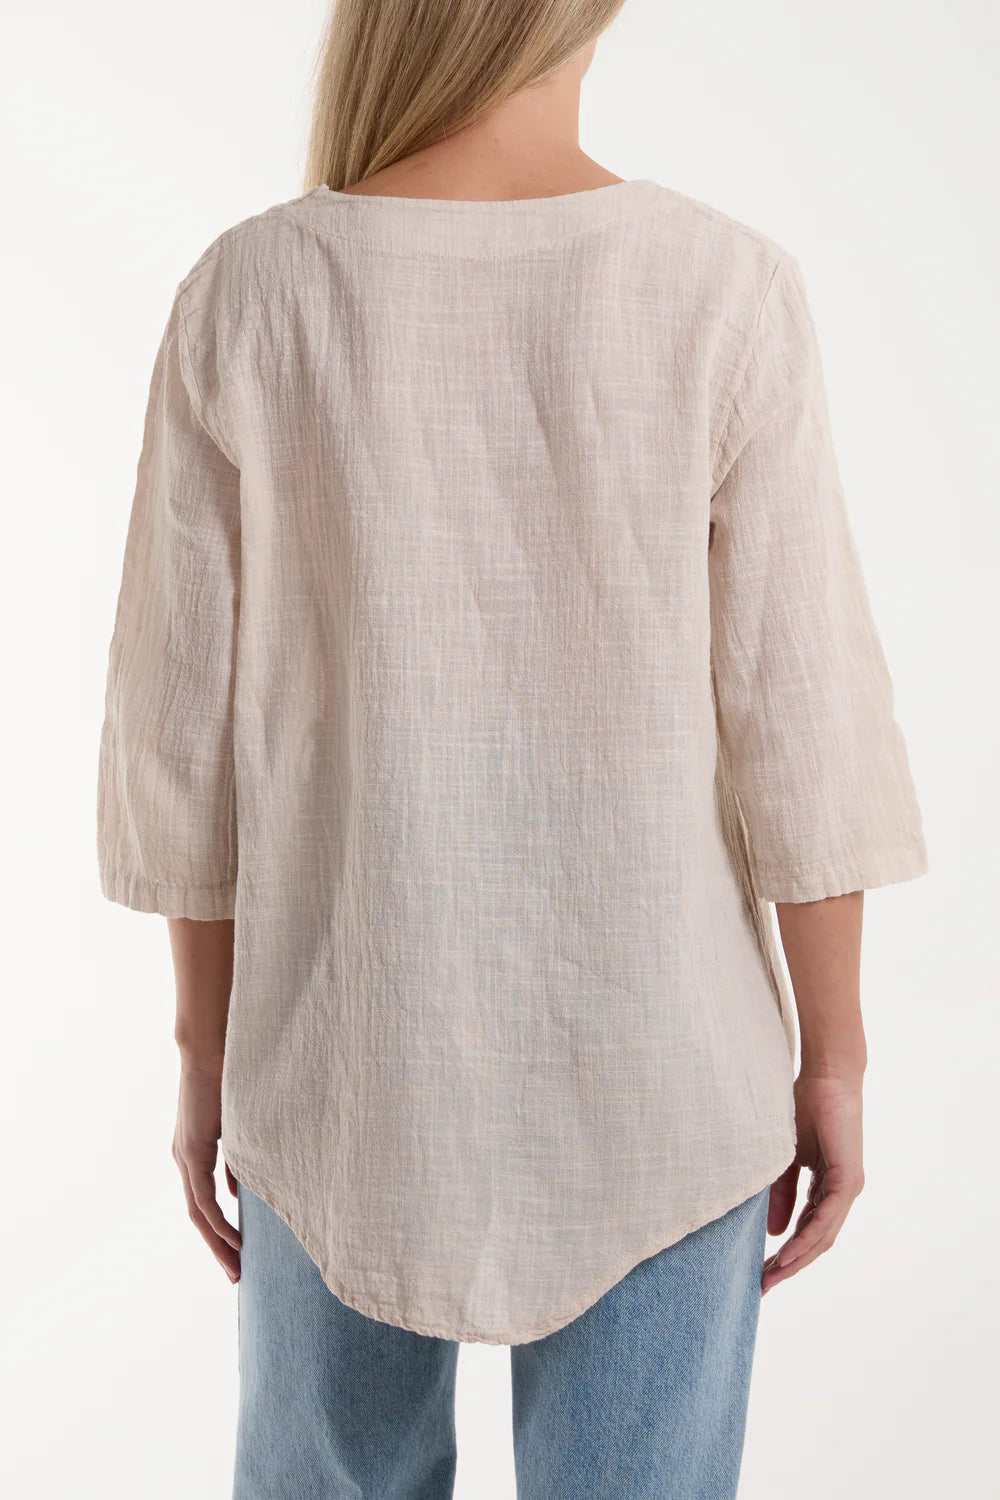 Front Button Cotton Top - Ivory